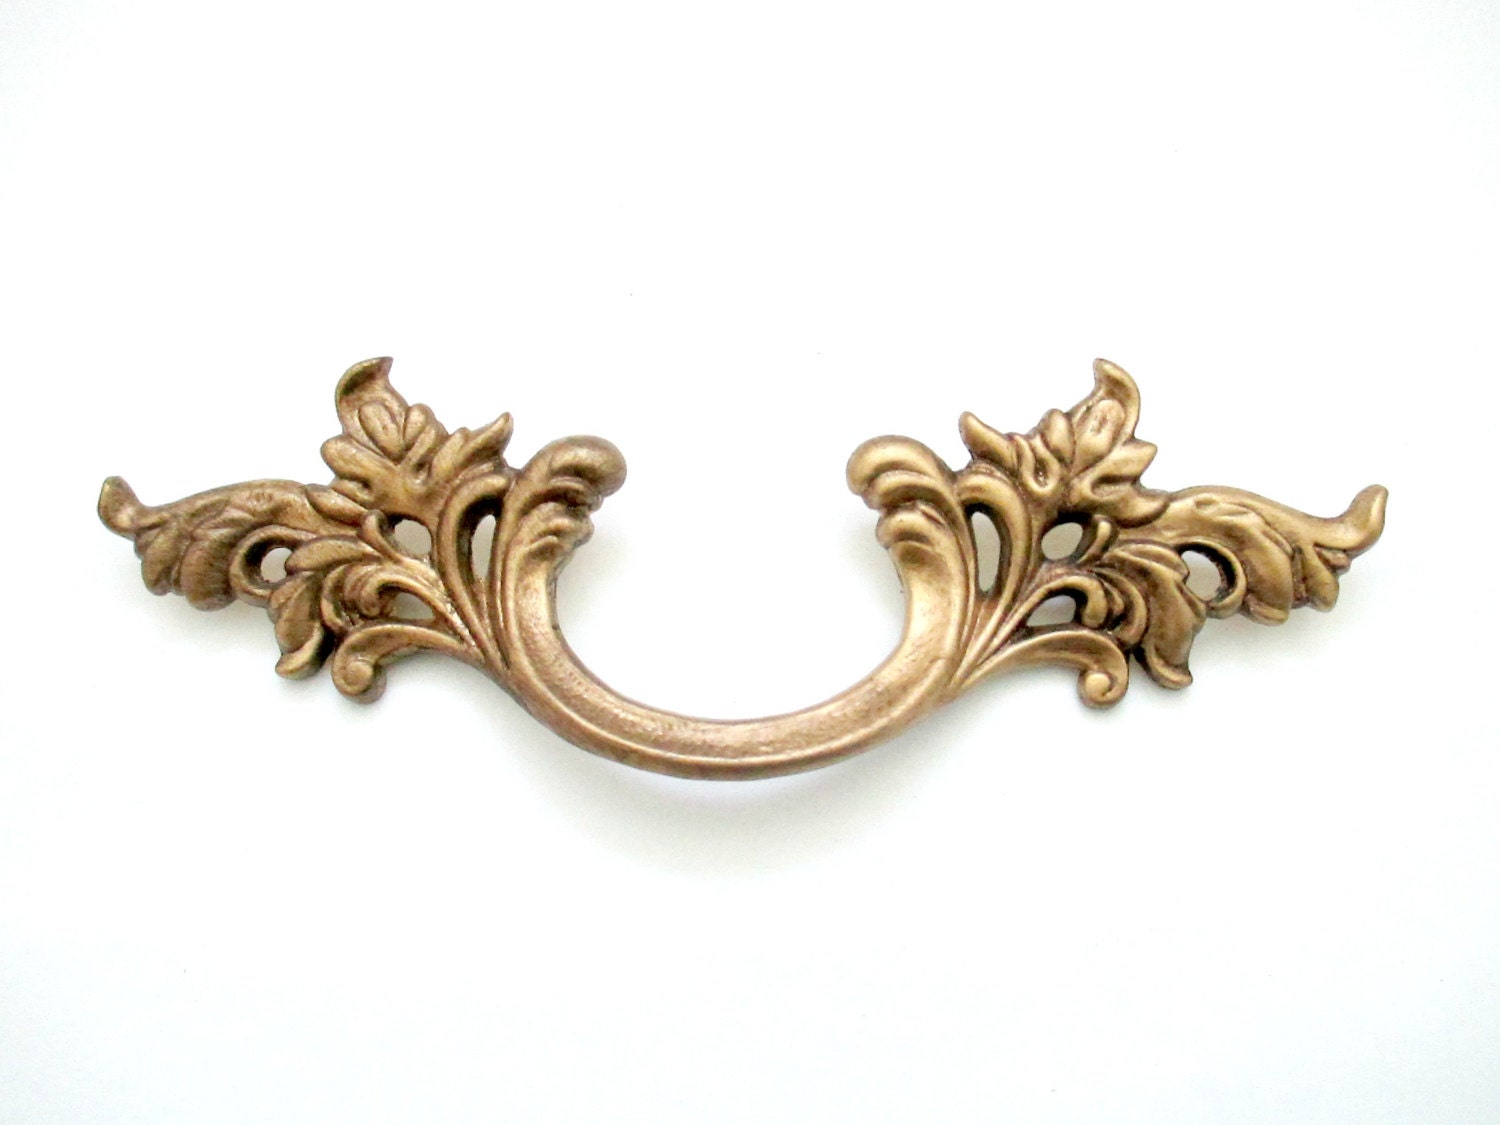 1 large French Provincial Drawer Pull 4.5 centers by Fairyhome